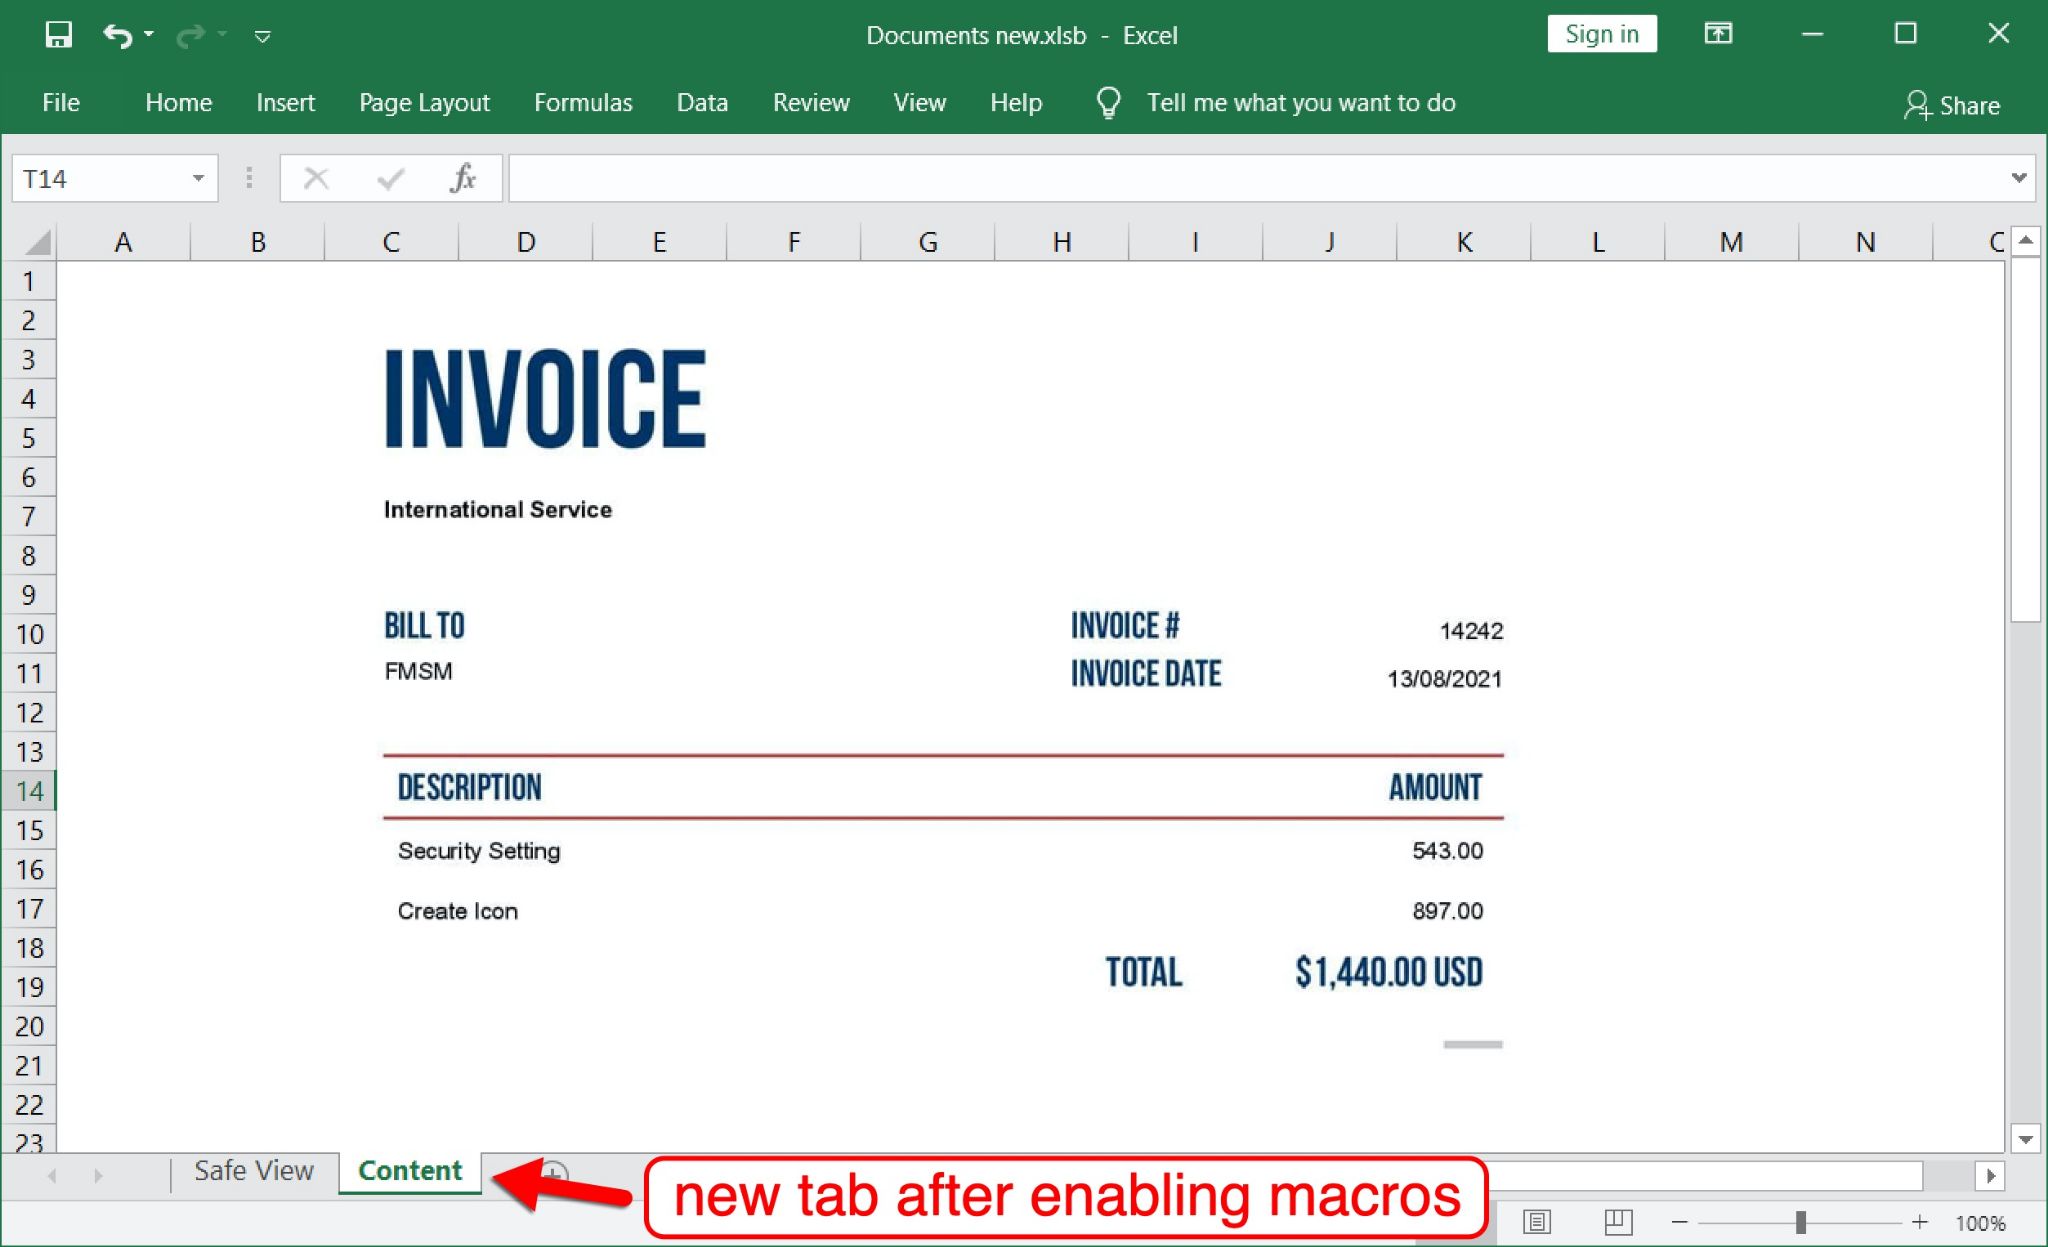 A fake invoice that appears on a malicious Excel spreadsheet. The red arrow indicates a new tab that appears after enabling macros.